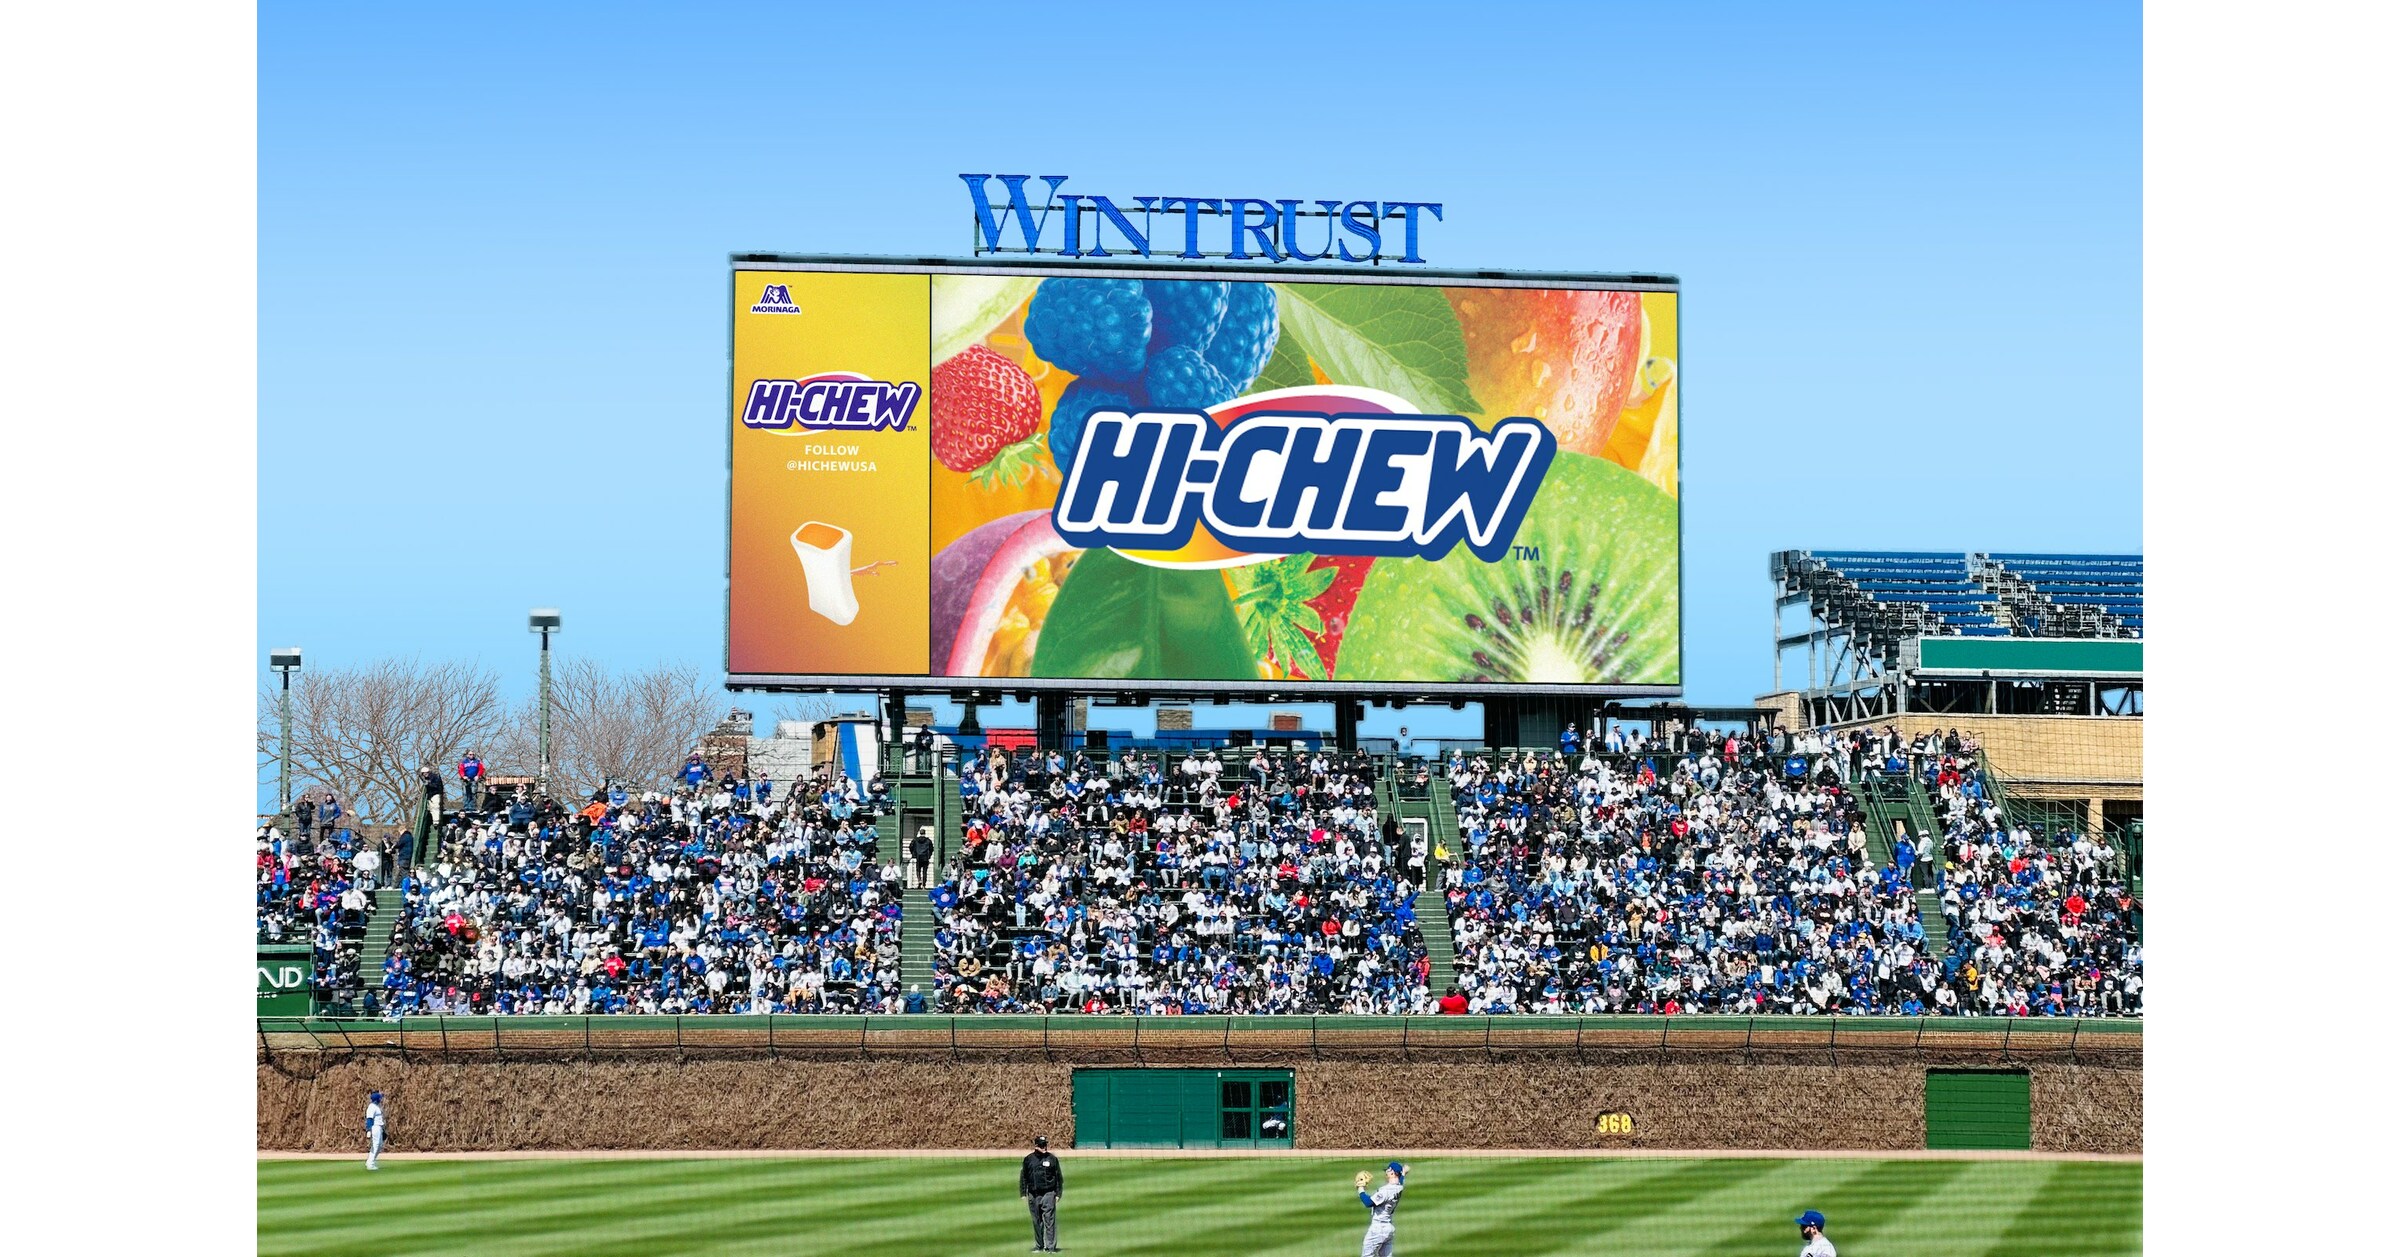 HI-CHEW™ Knocks It Out of the Ballpark with Four New MLB Partnerships